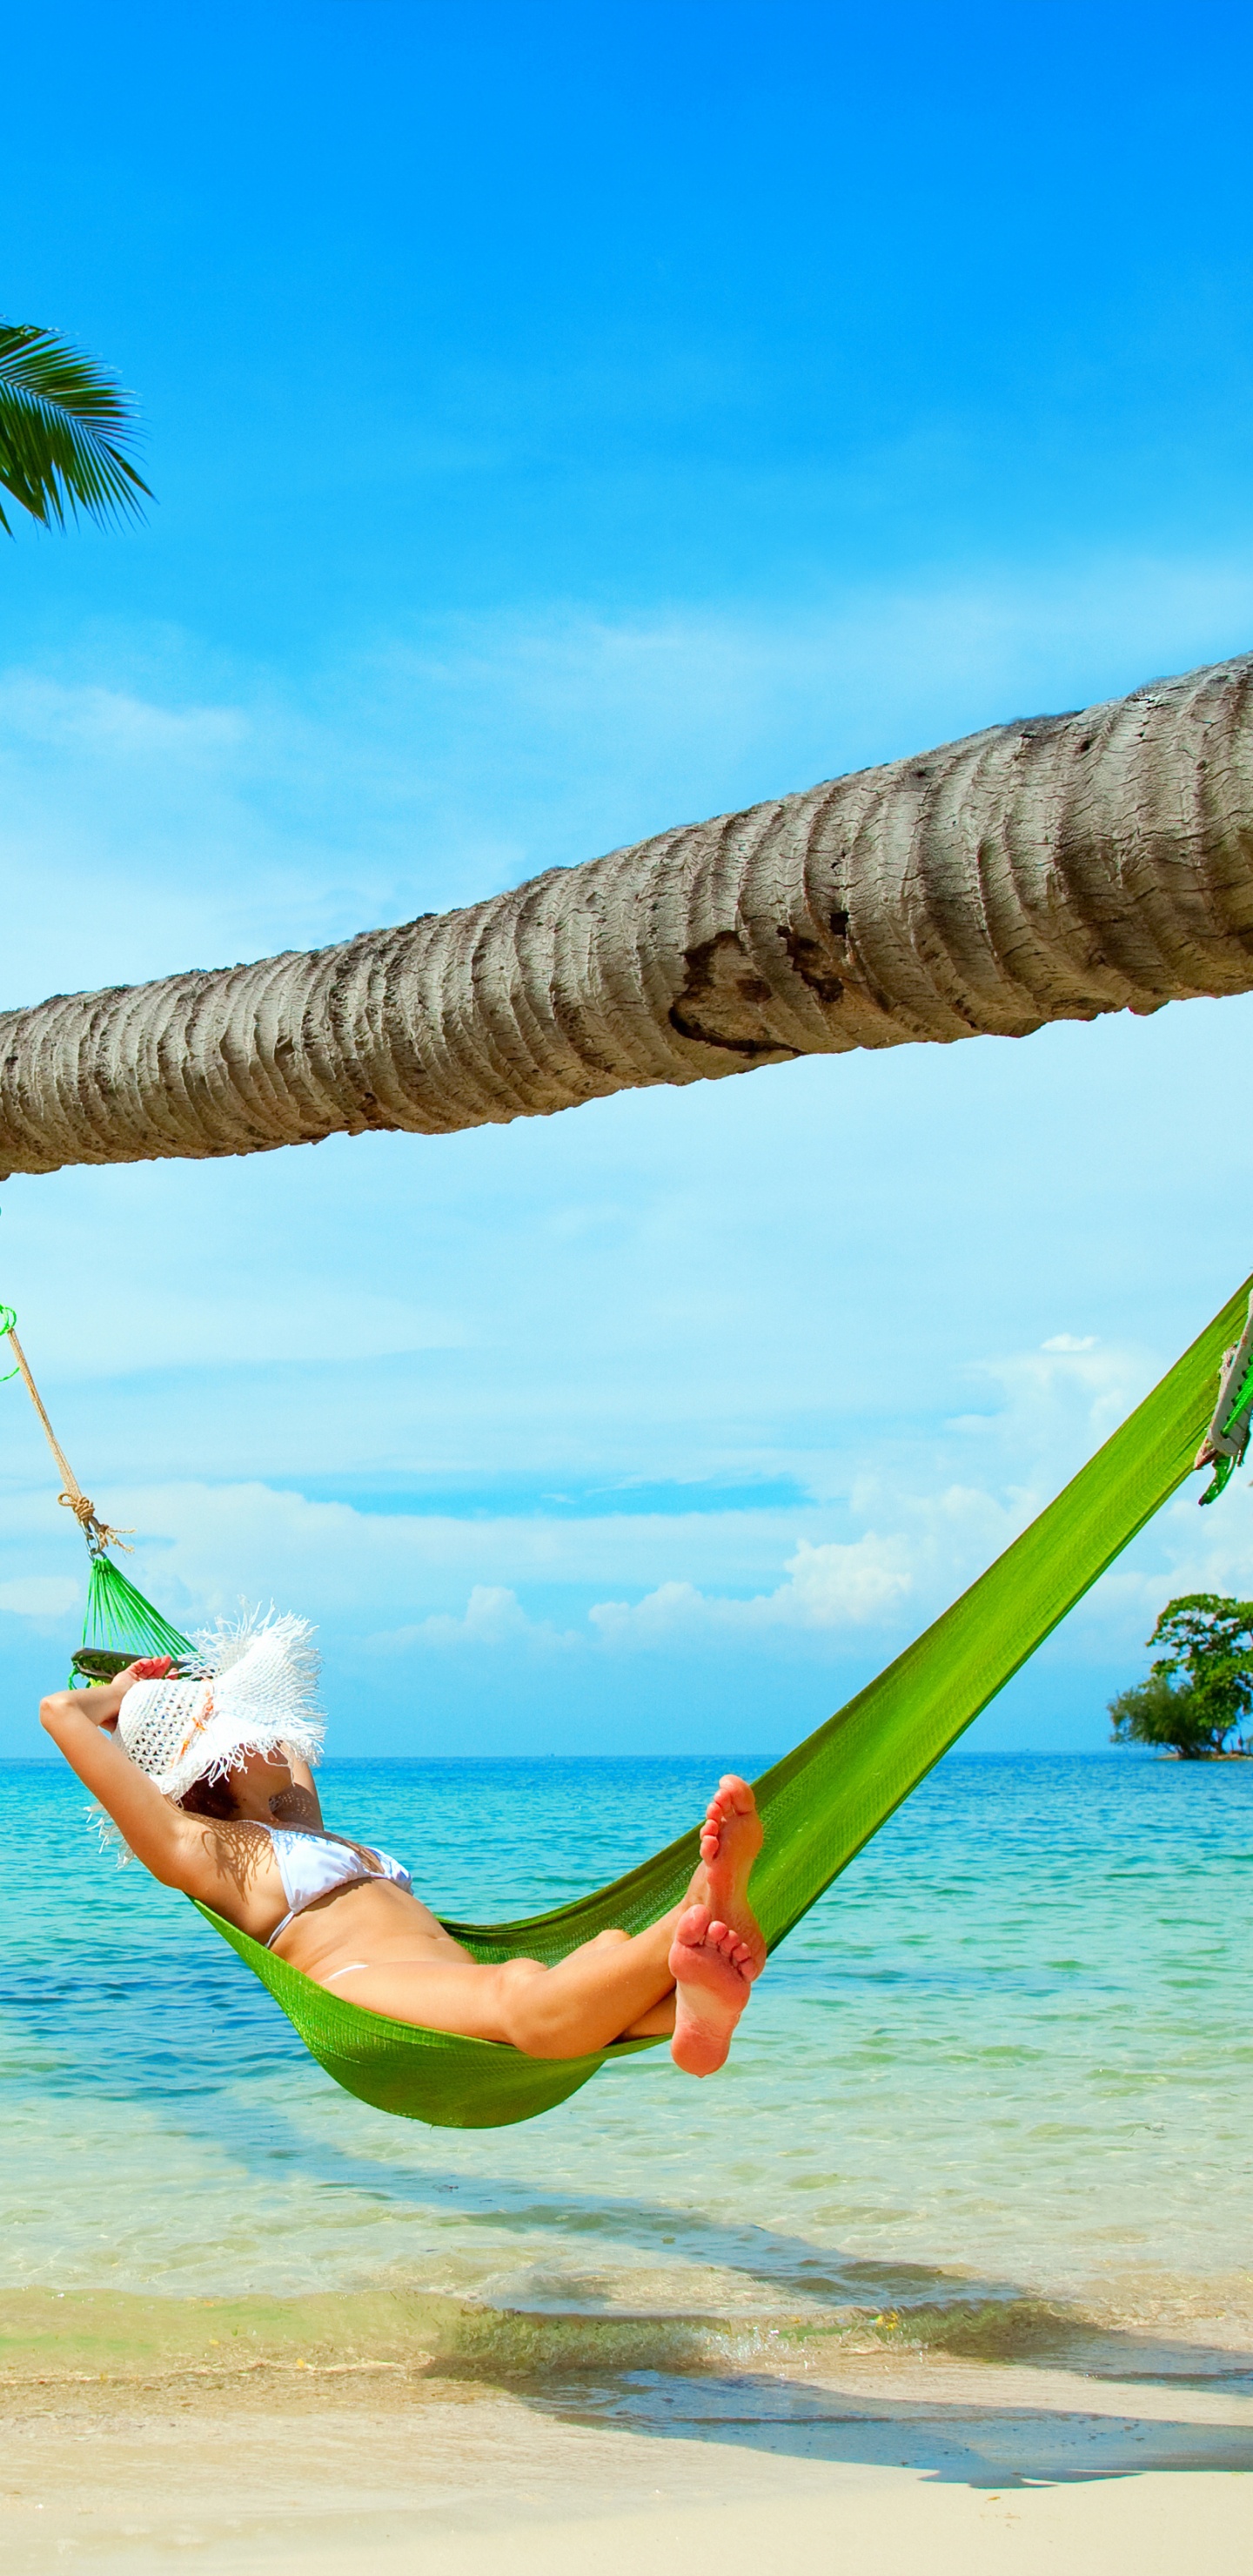 Woman in White Shirt and Green Shorts Lying on Hammock Under Coconut Tree During Daytime. Wallpaper in 1440x2960 Resolution